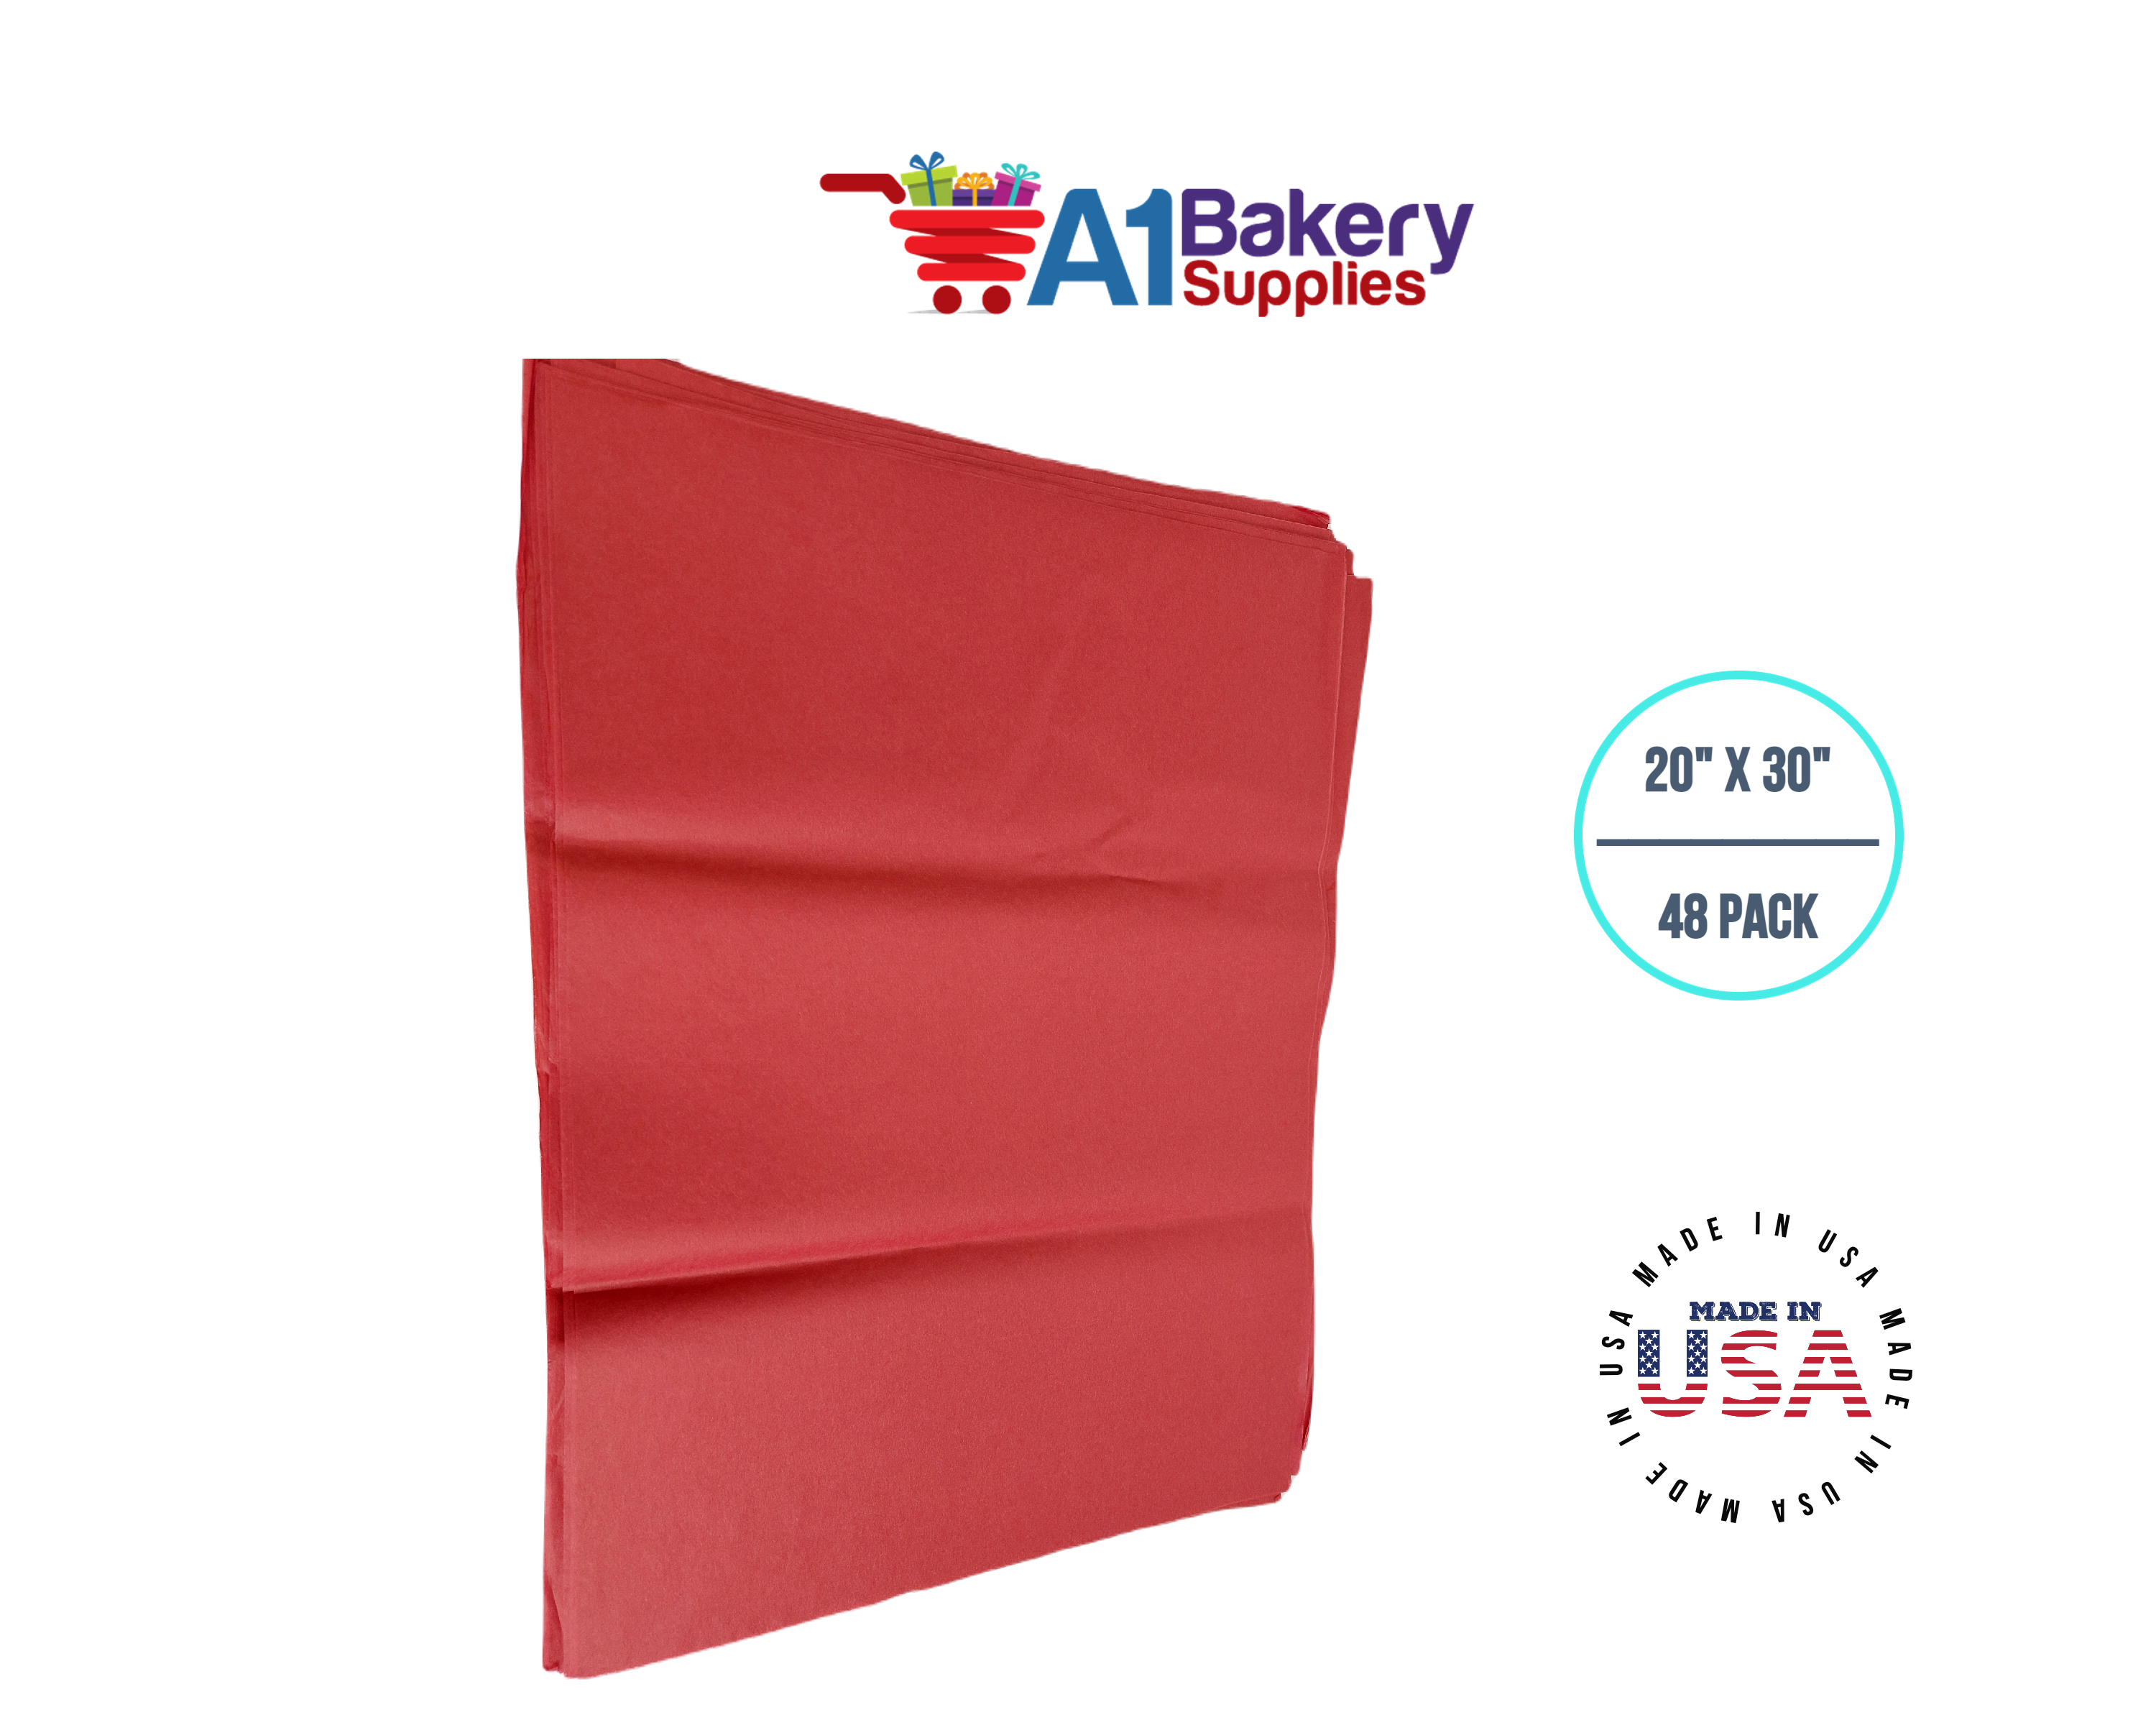 Coral Rose Tissue Paper Squares, Bulk 480 Sheets, Premium Gift Wrap and Art Supplies for Birthdays, Holidays, or Presents by A1 Bakery Supplies, Made